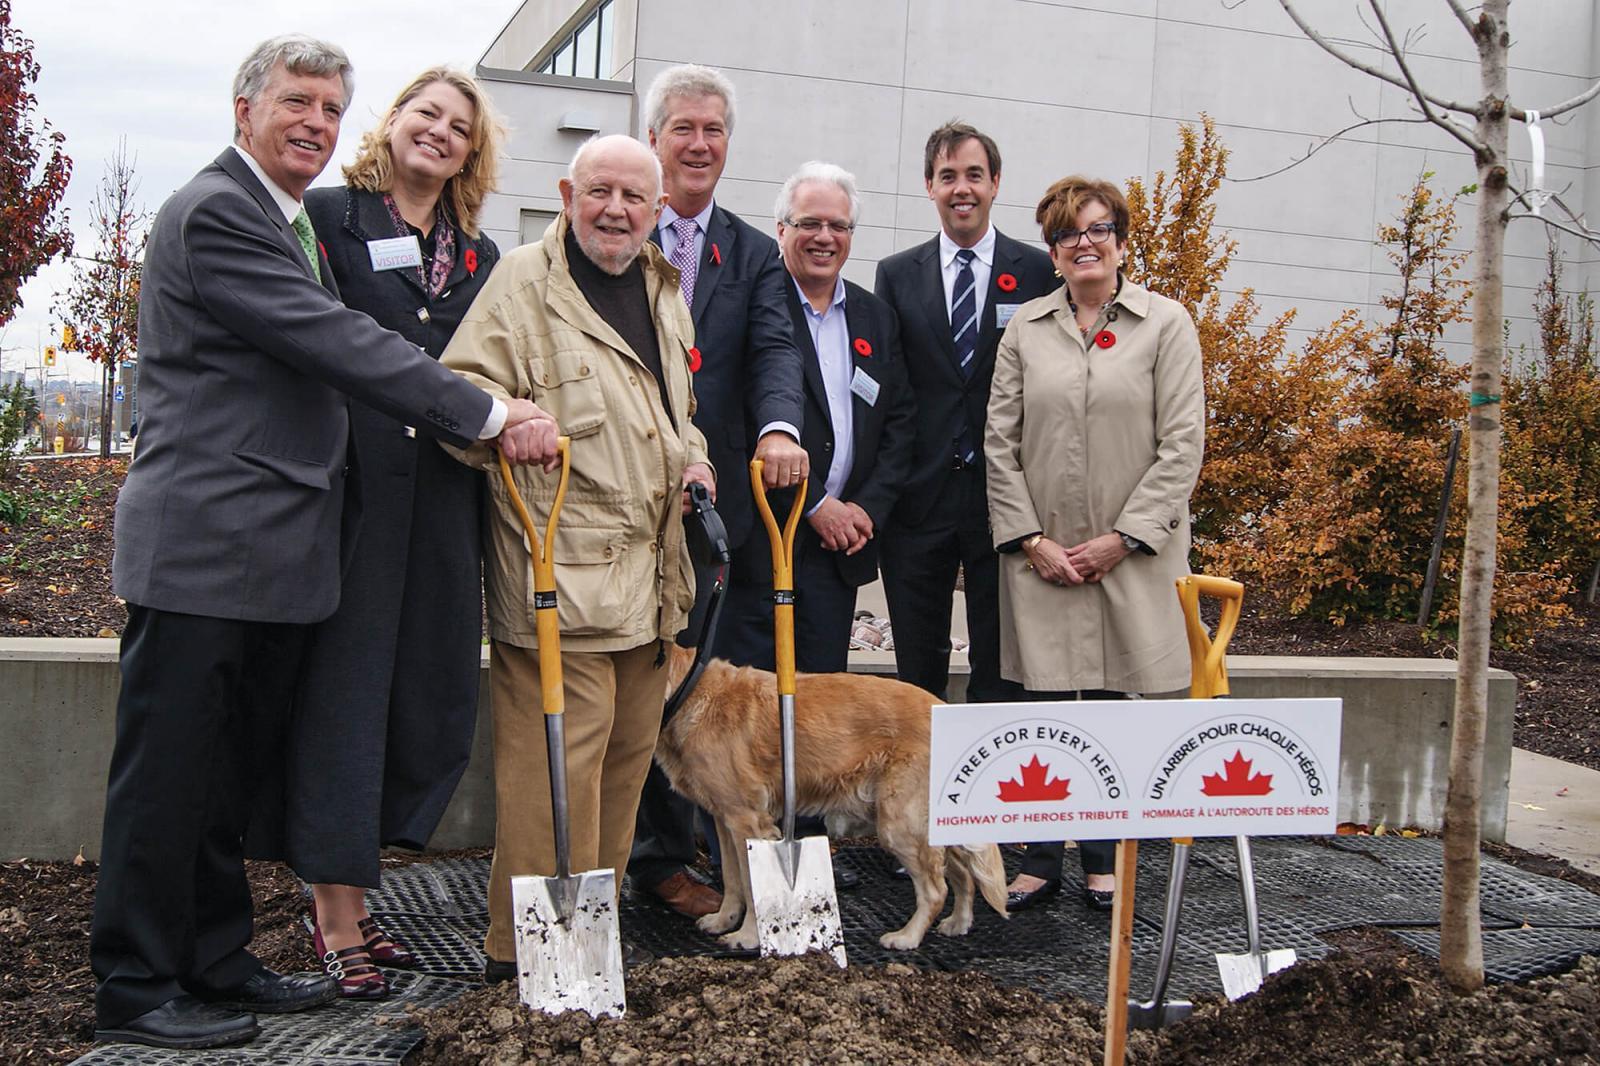 A ceremonial tree planting at the Coroner’s Office Complex in Toronto on Nov. 6 began the Highway of Heroes campaign to plant 117,000 trees along Hwy. 401. In photo, from left, are some of those who took part in the Toronto ceremony, Mark Cullen, chair of the Campaign; Paula Berketo, of the Ministry of Transportation; Ken Jewett, Maple Leaves Forever; Rob Keen, Forests Ontario; Tony DiGiovanni and Dave Braun, both representing Landscape Ontario, and Eleanor McMahon, Burlington MPP and Parliamentary Assistant to the Ministry of Natural Resources and Forestry.